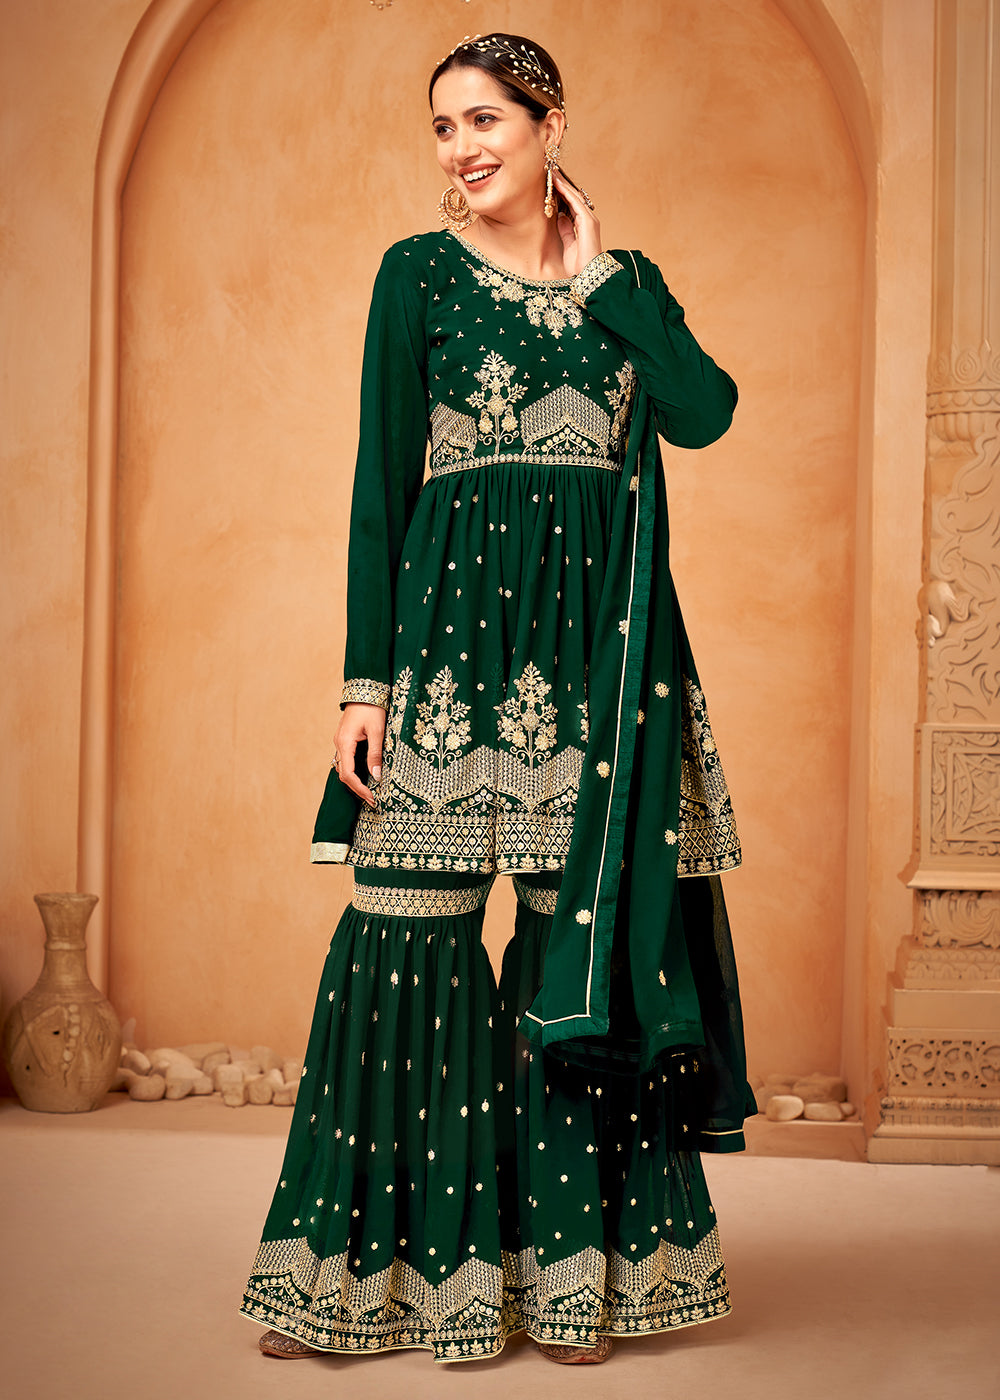 Shop Now Imperial Dark Green Embroidered Wedding Festive Gharara Suit Online at Empress Clothing in USA, UK, Canada, Germany & Worldwide.